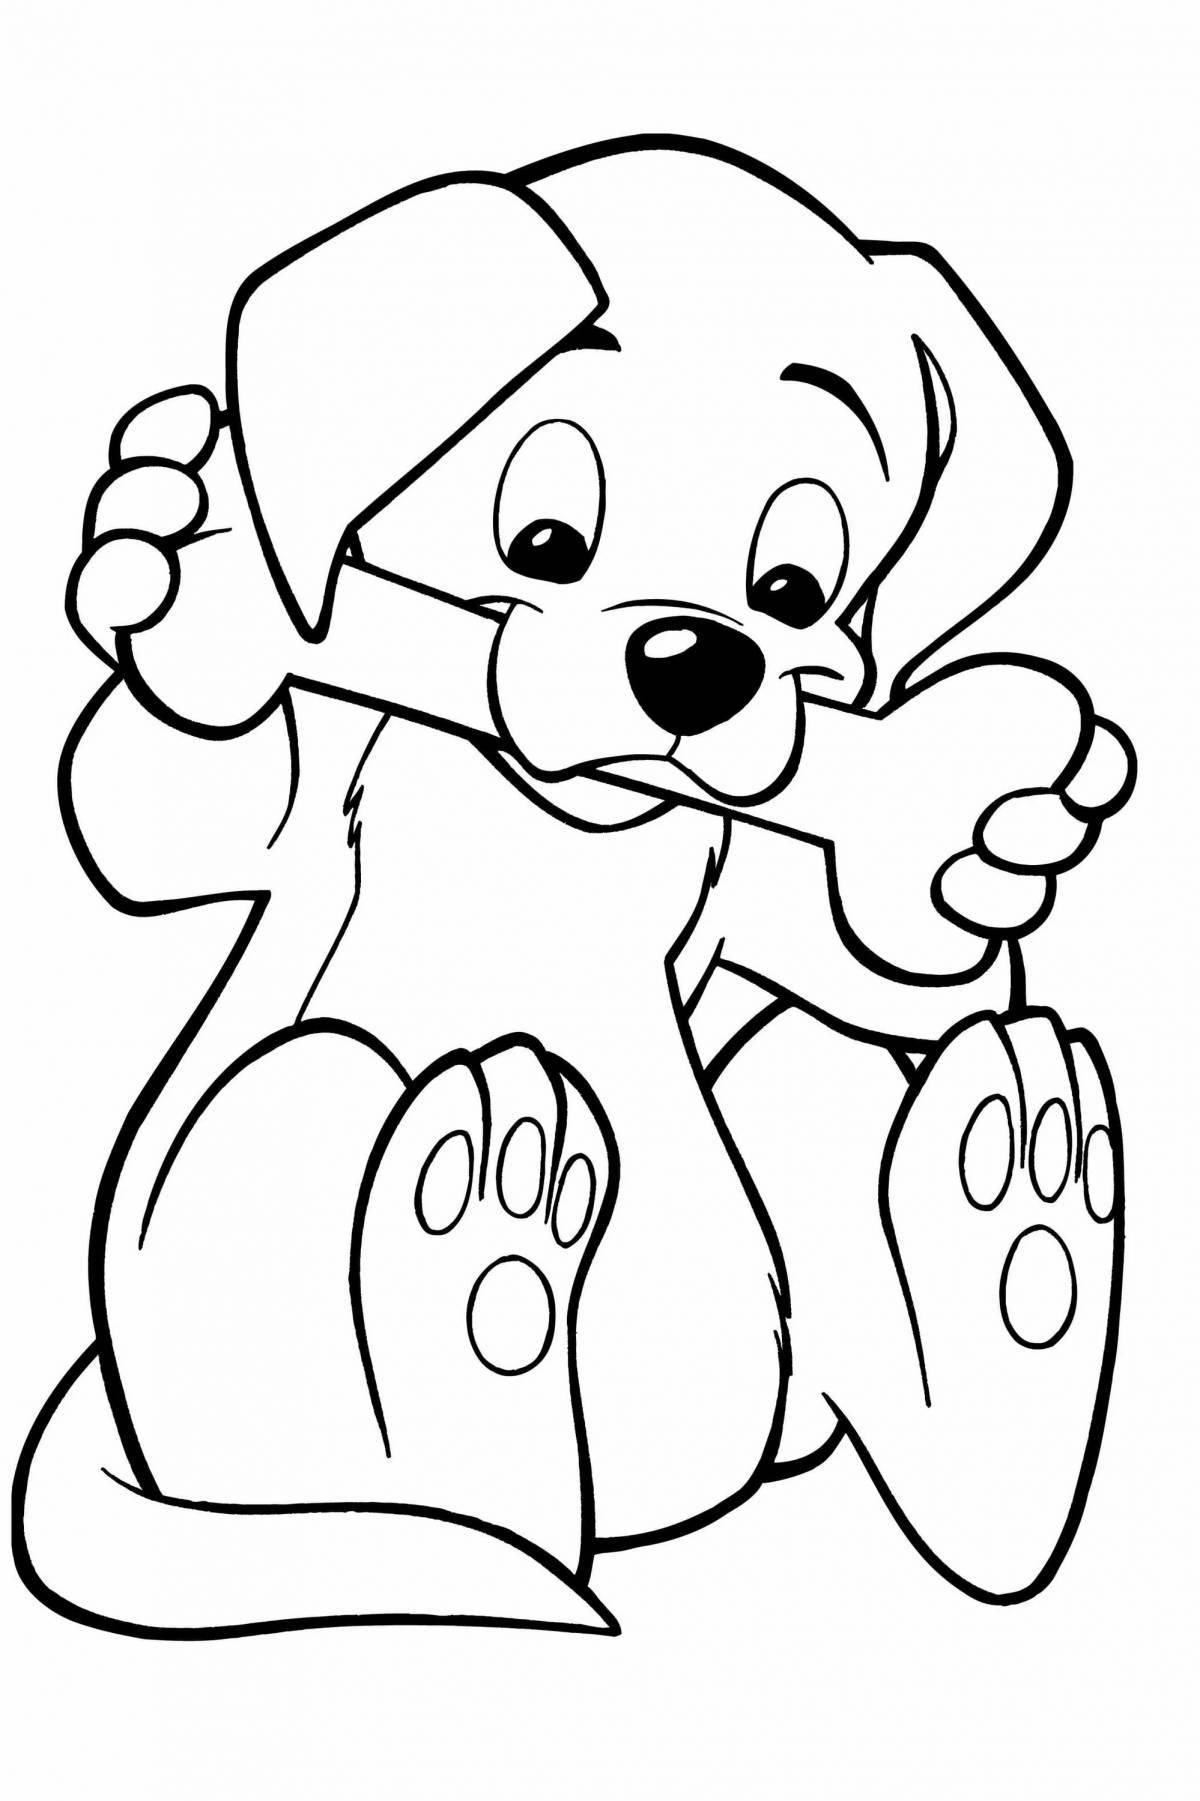 Coloring page graceful dog